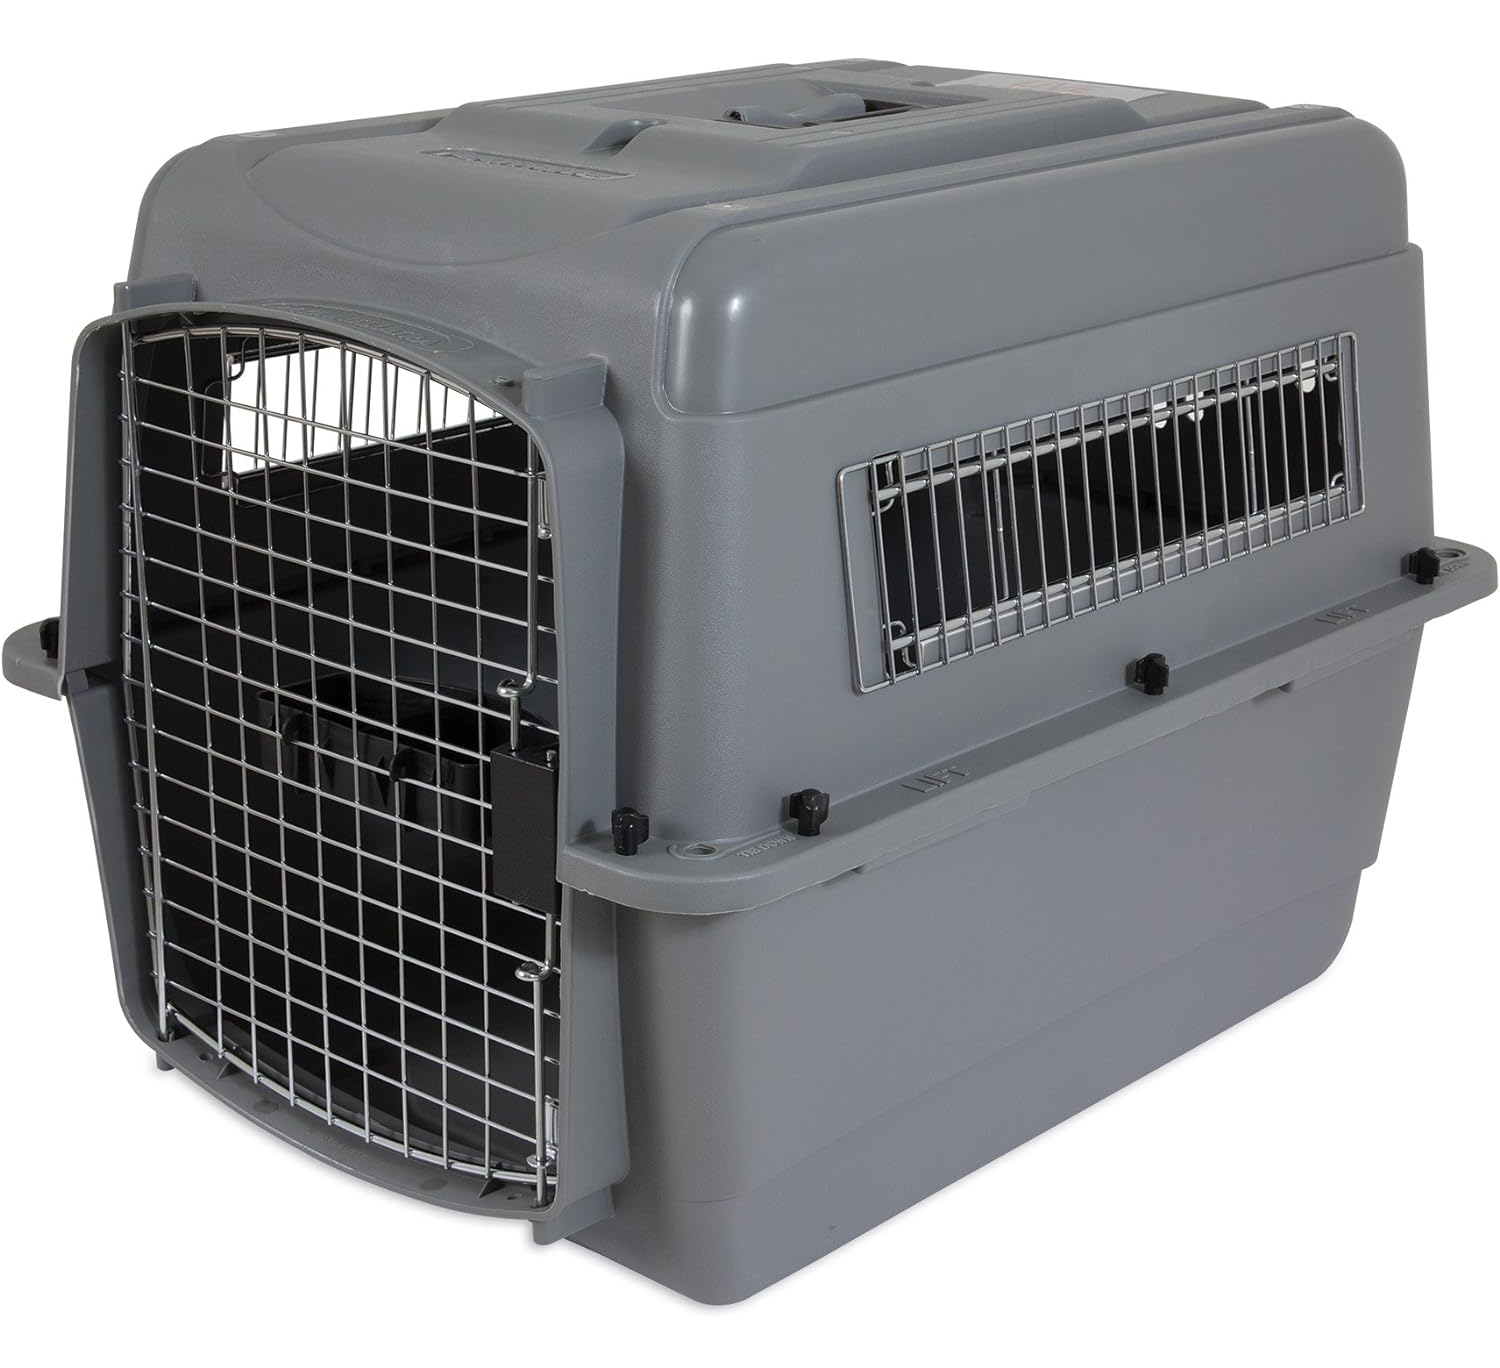 Petmate Sky Kennel, 28 Inch, IATA Compliant Dog Crate for Pets 